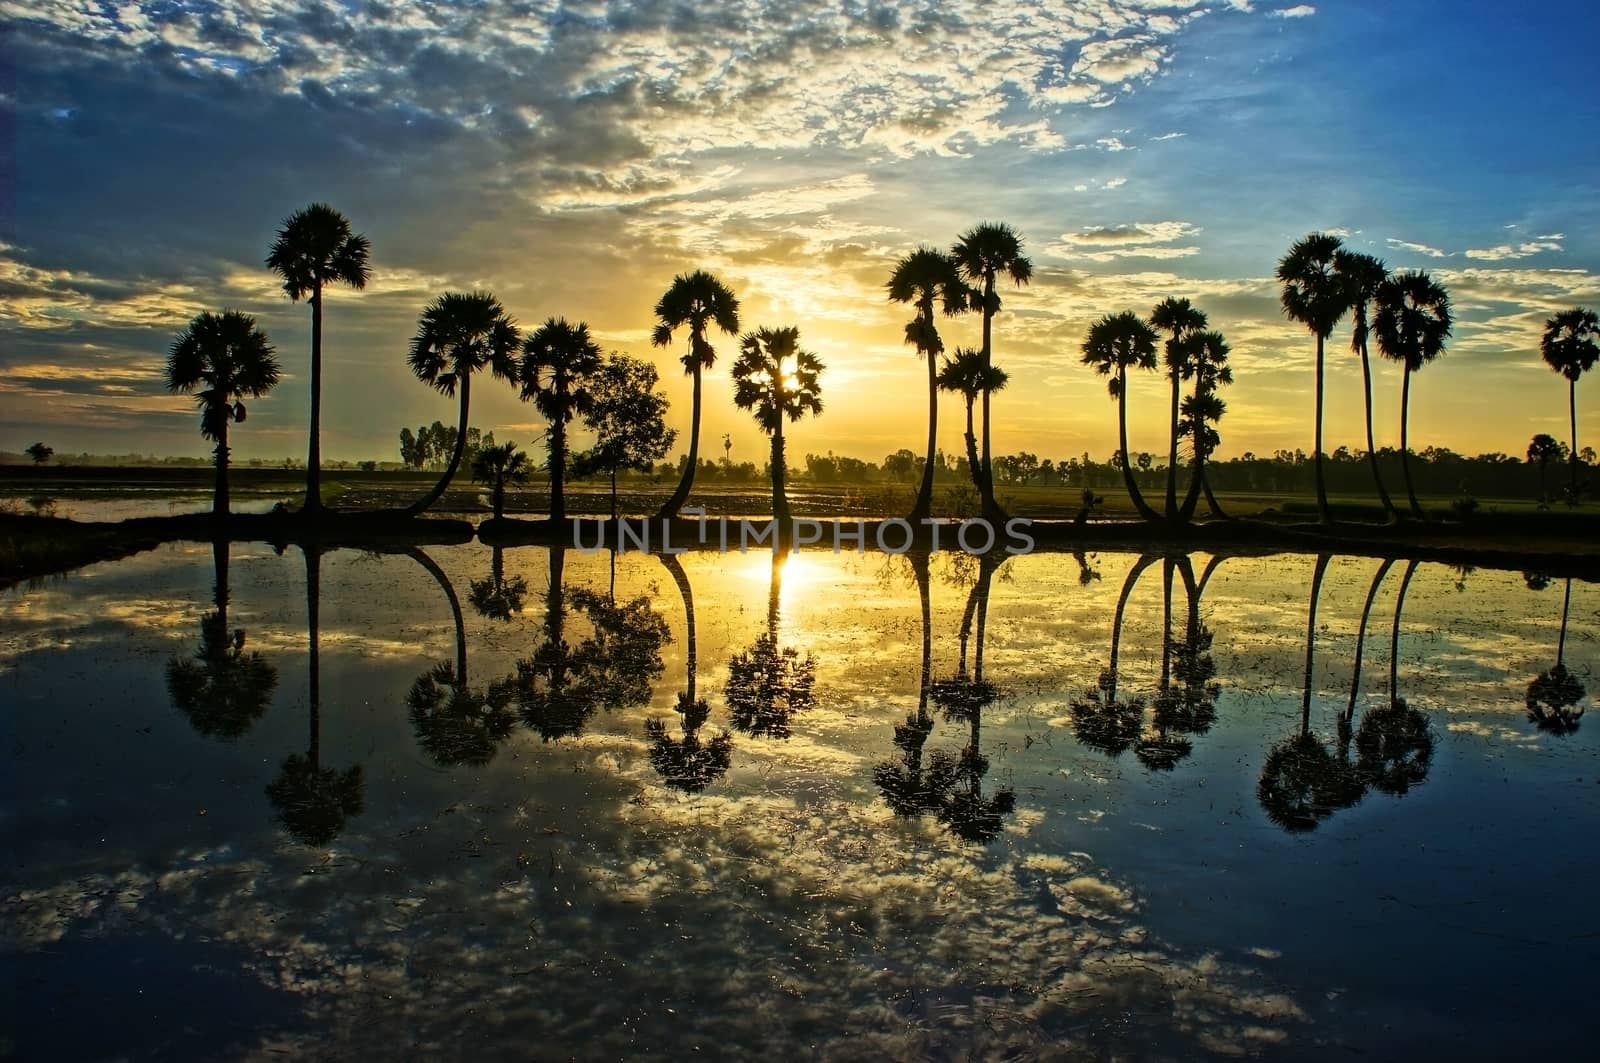 cloudscape and palm trees in silhouette reflect on water in sunr by xuanhuongho